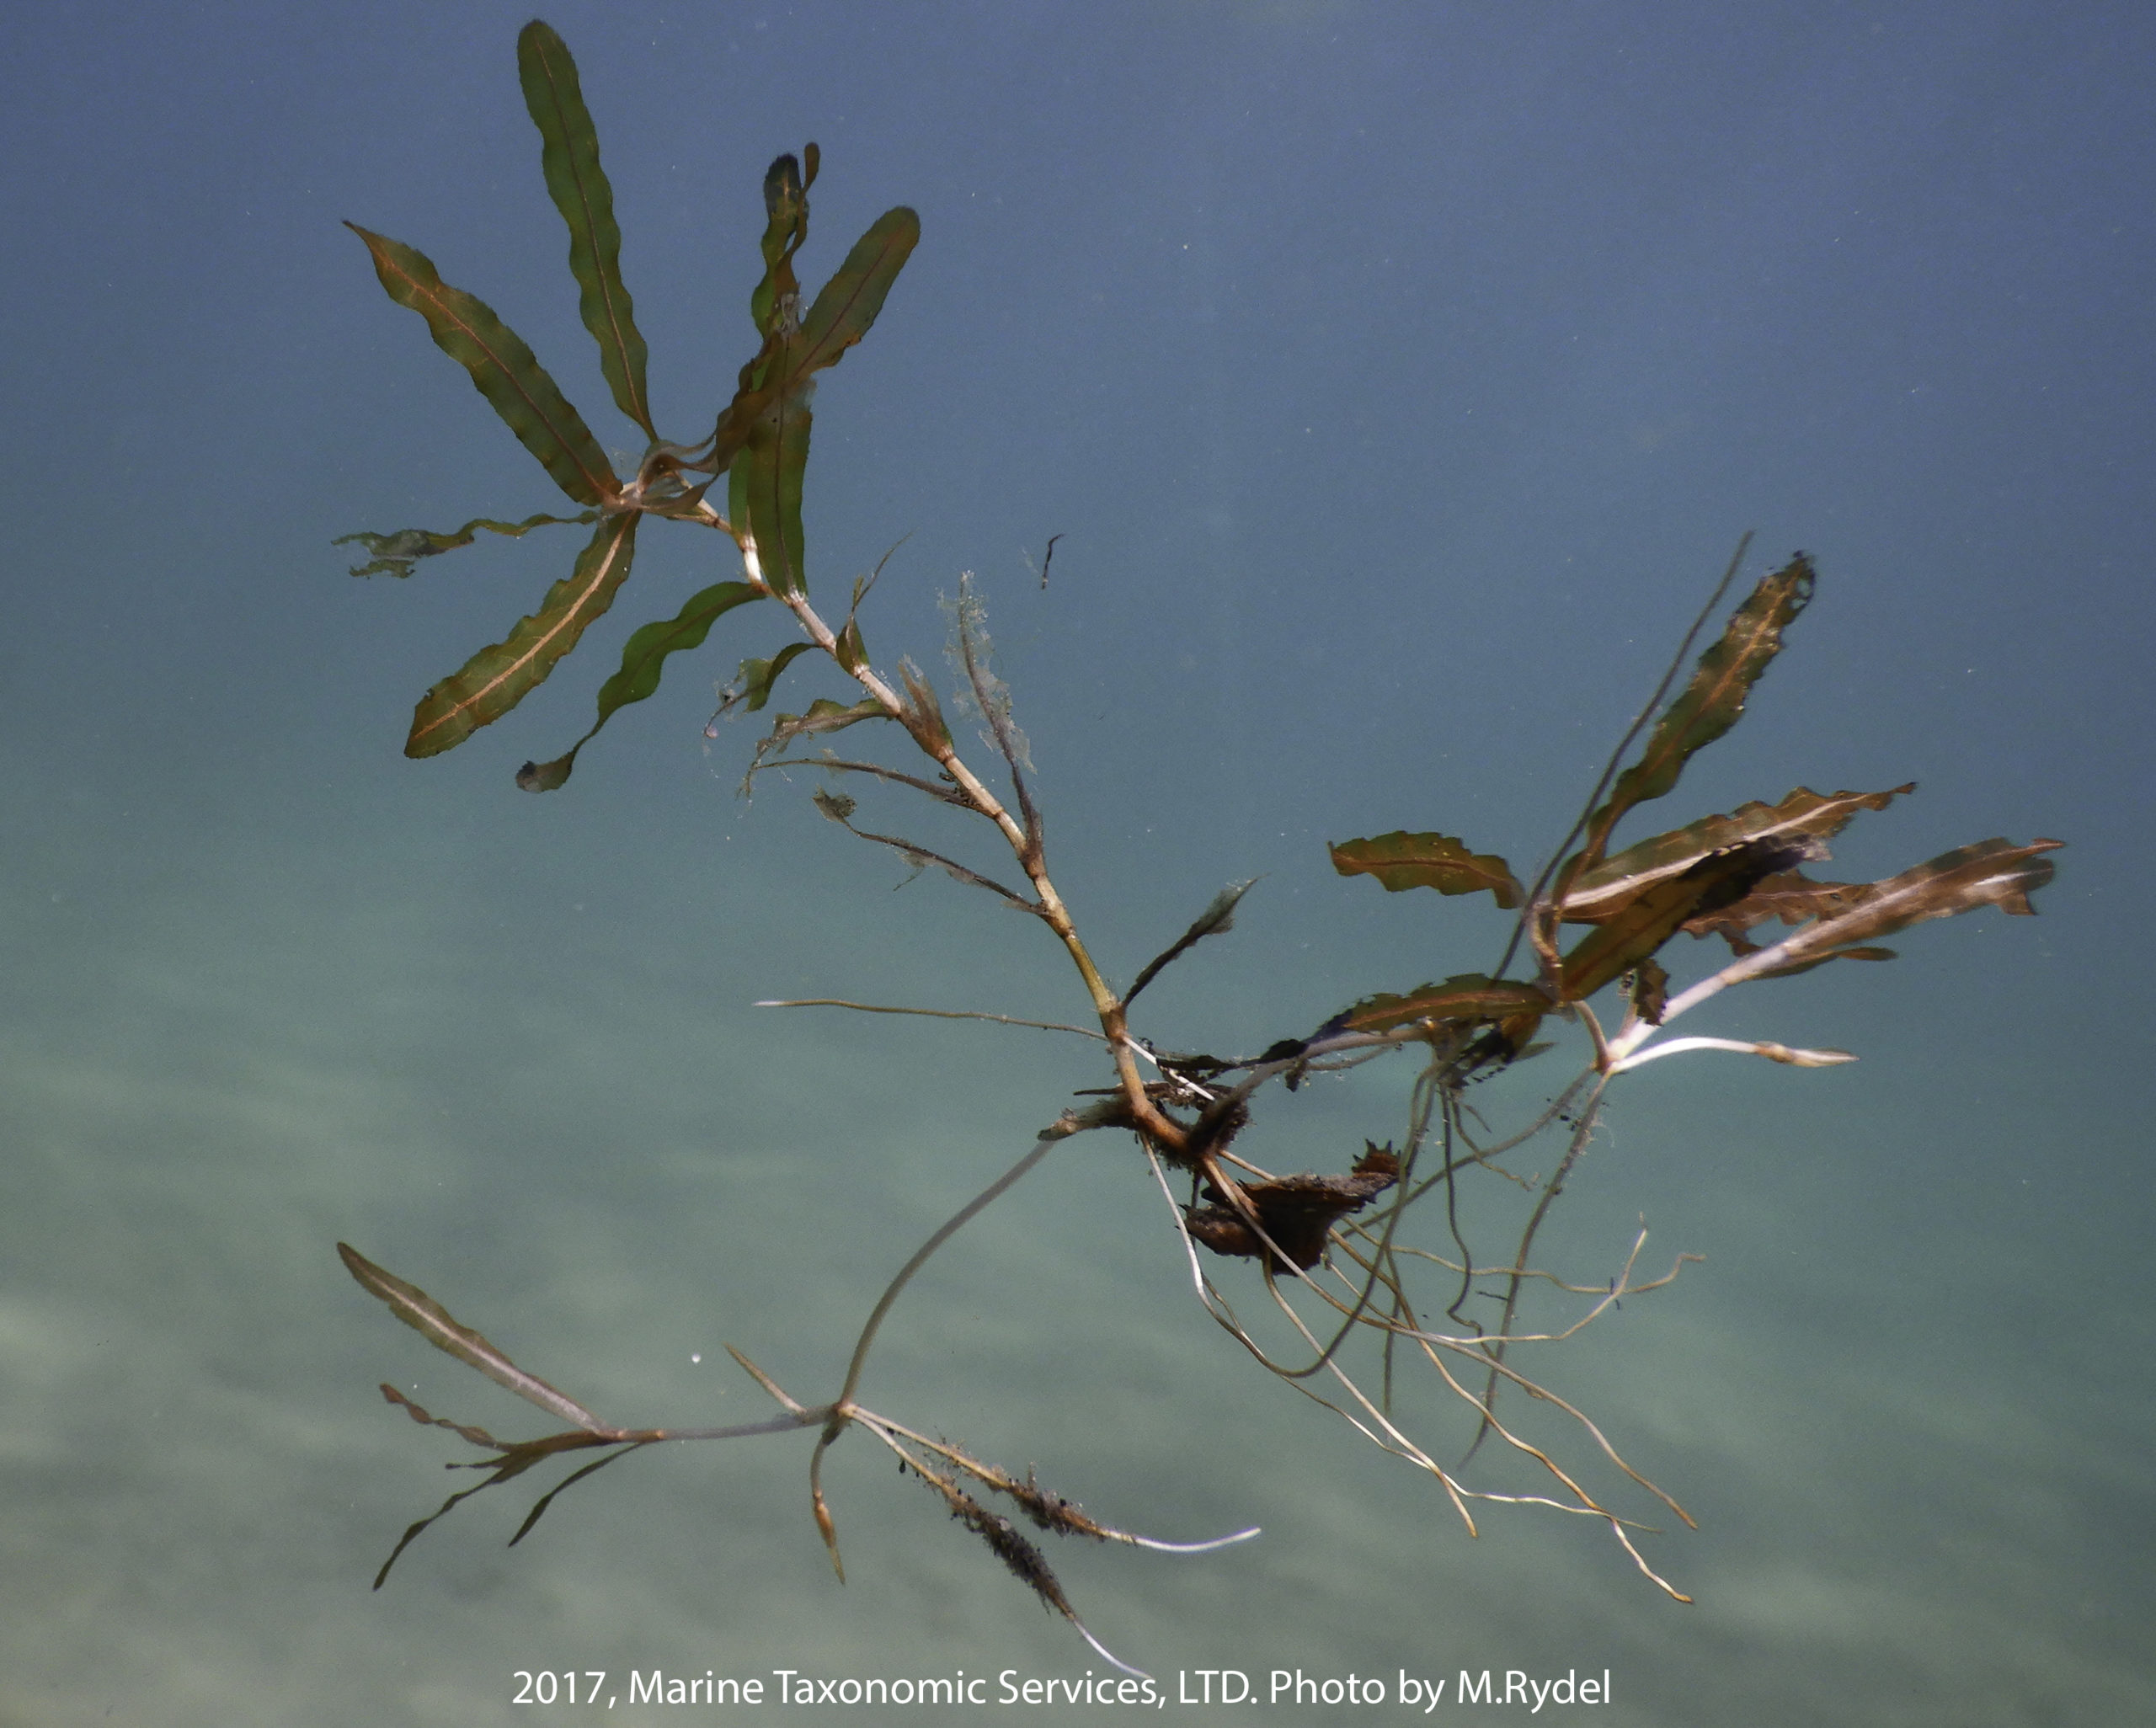 Image shows a green and red curly-leaf pondweed fragment suspended in blue water.